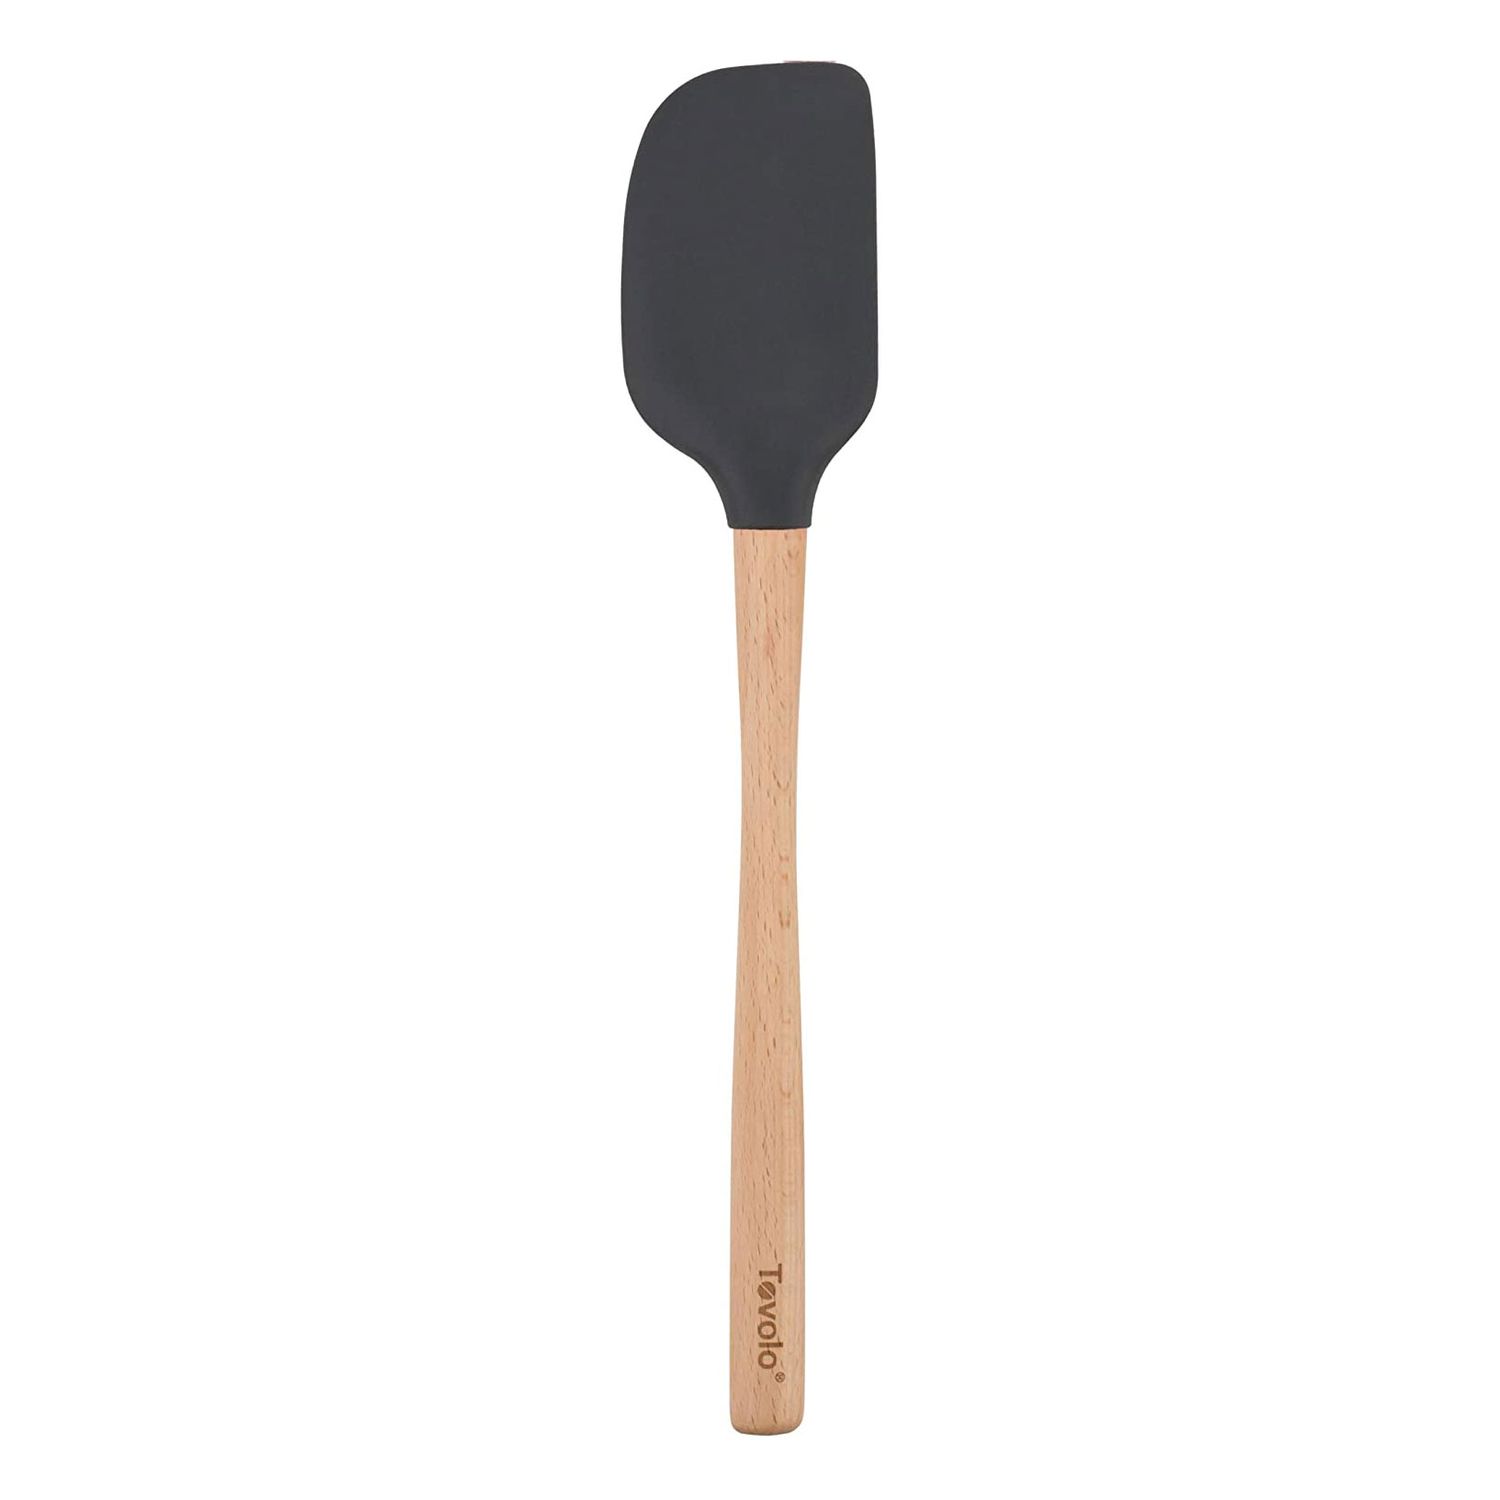 Tovolo spatula with silicone head and wooden handle